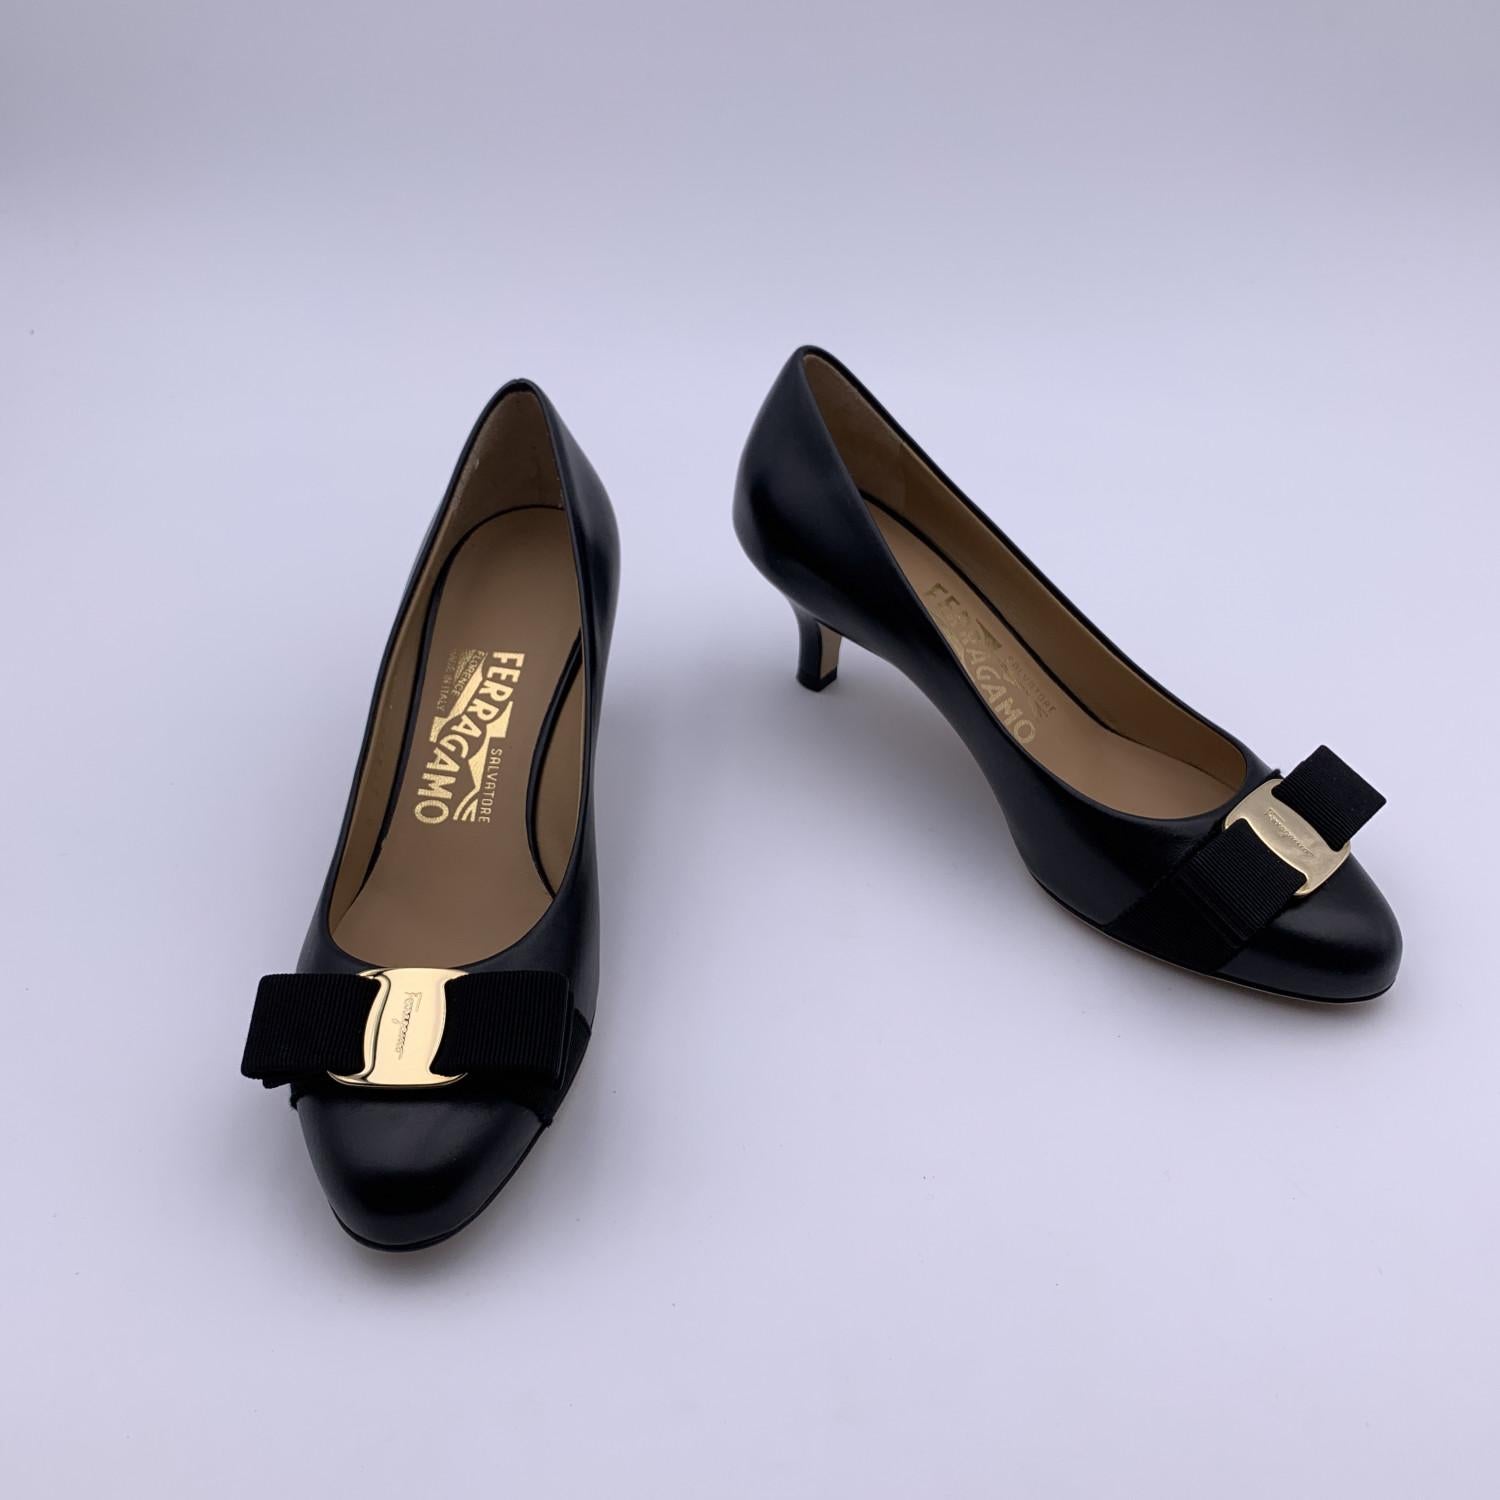 Classic Salvatore Ferragamo 'Carla' pumps . Crafted in black leather. They feature a round toe, Vara-bow detailing and covered heels. Heels height: 2.25 inches - 5.5 cm - . Leather outsole. Made in Italy. Size: US 4.5 C - EU 35 C (The size shown for